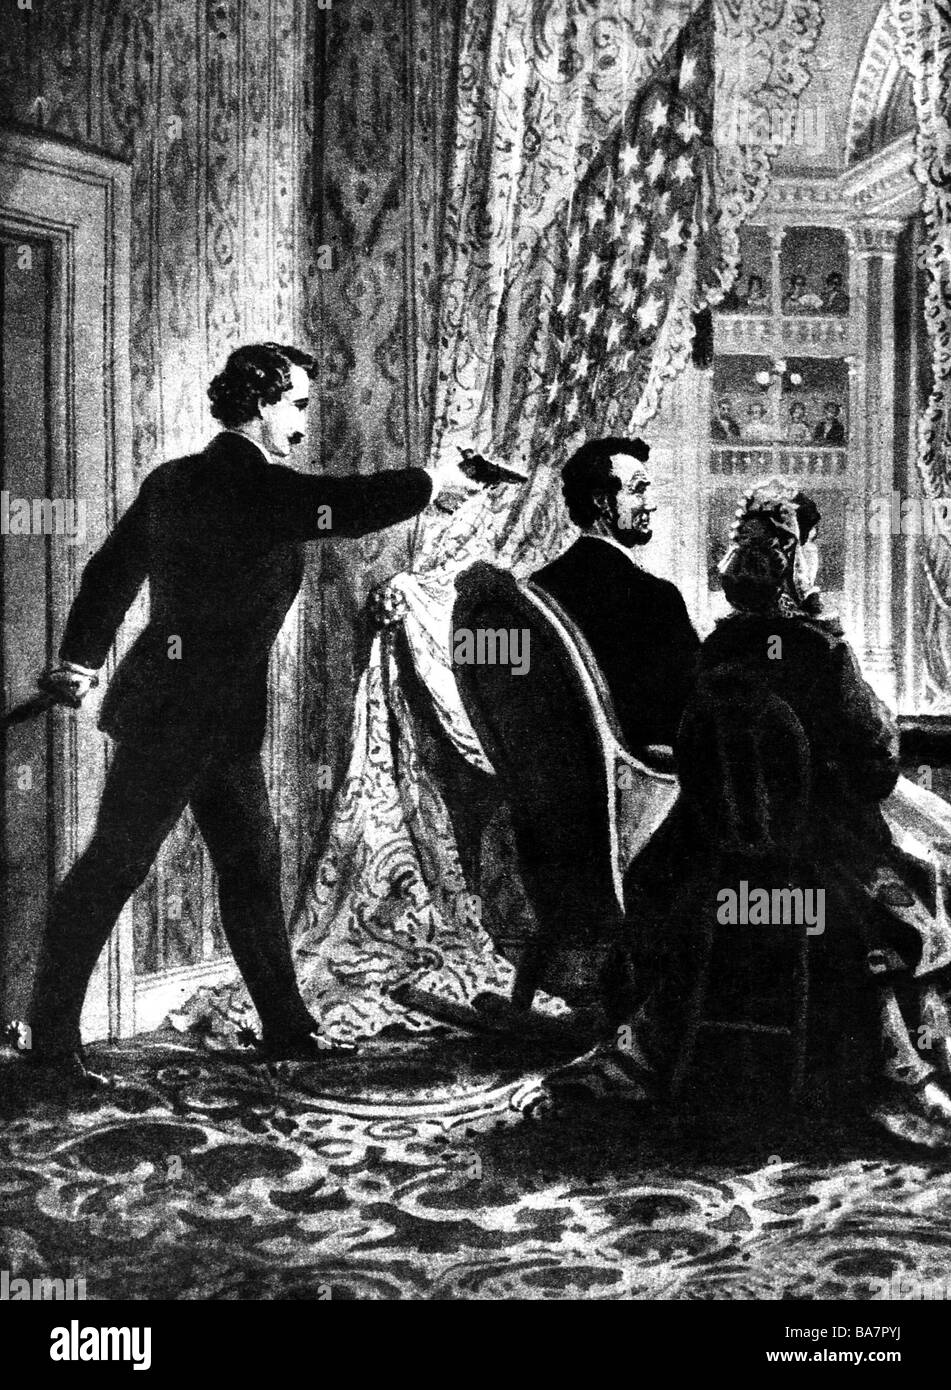 Lincoln, Abraham, 12.2.1809 - 15.4.1865, American politician, 16th President of the USA 1861 - 1865, his assassination by the actor John, Stock Photo